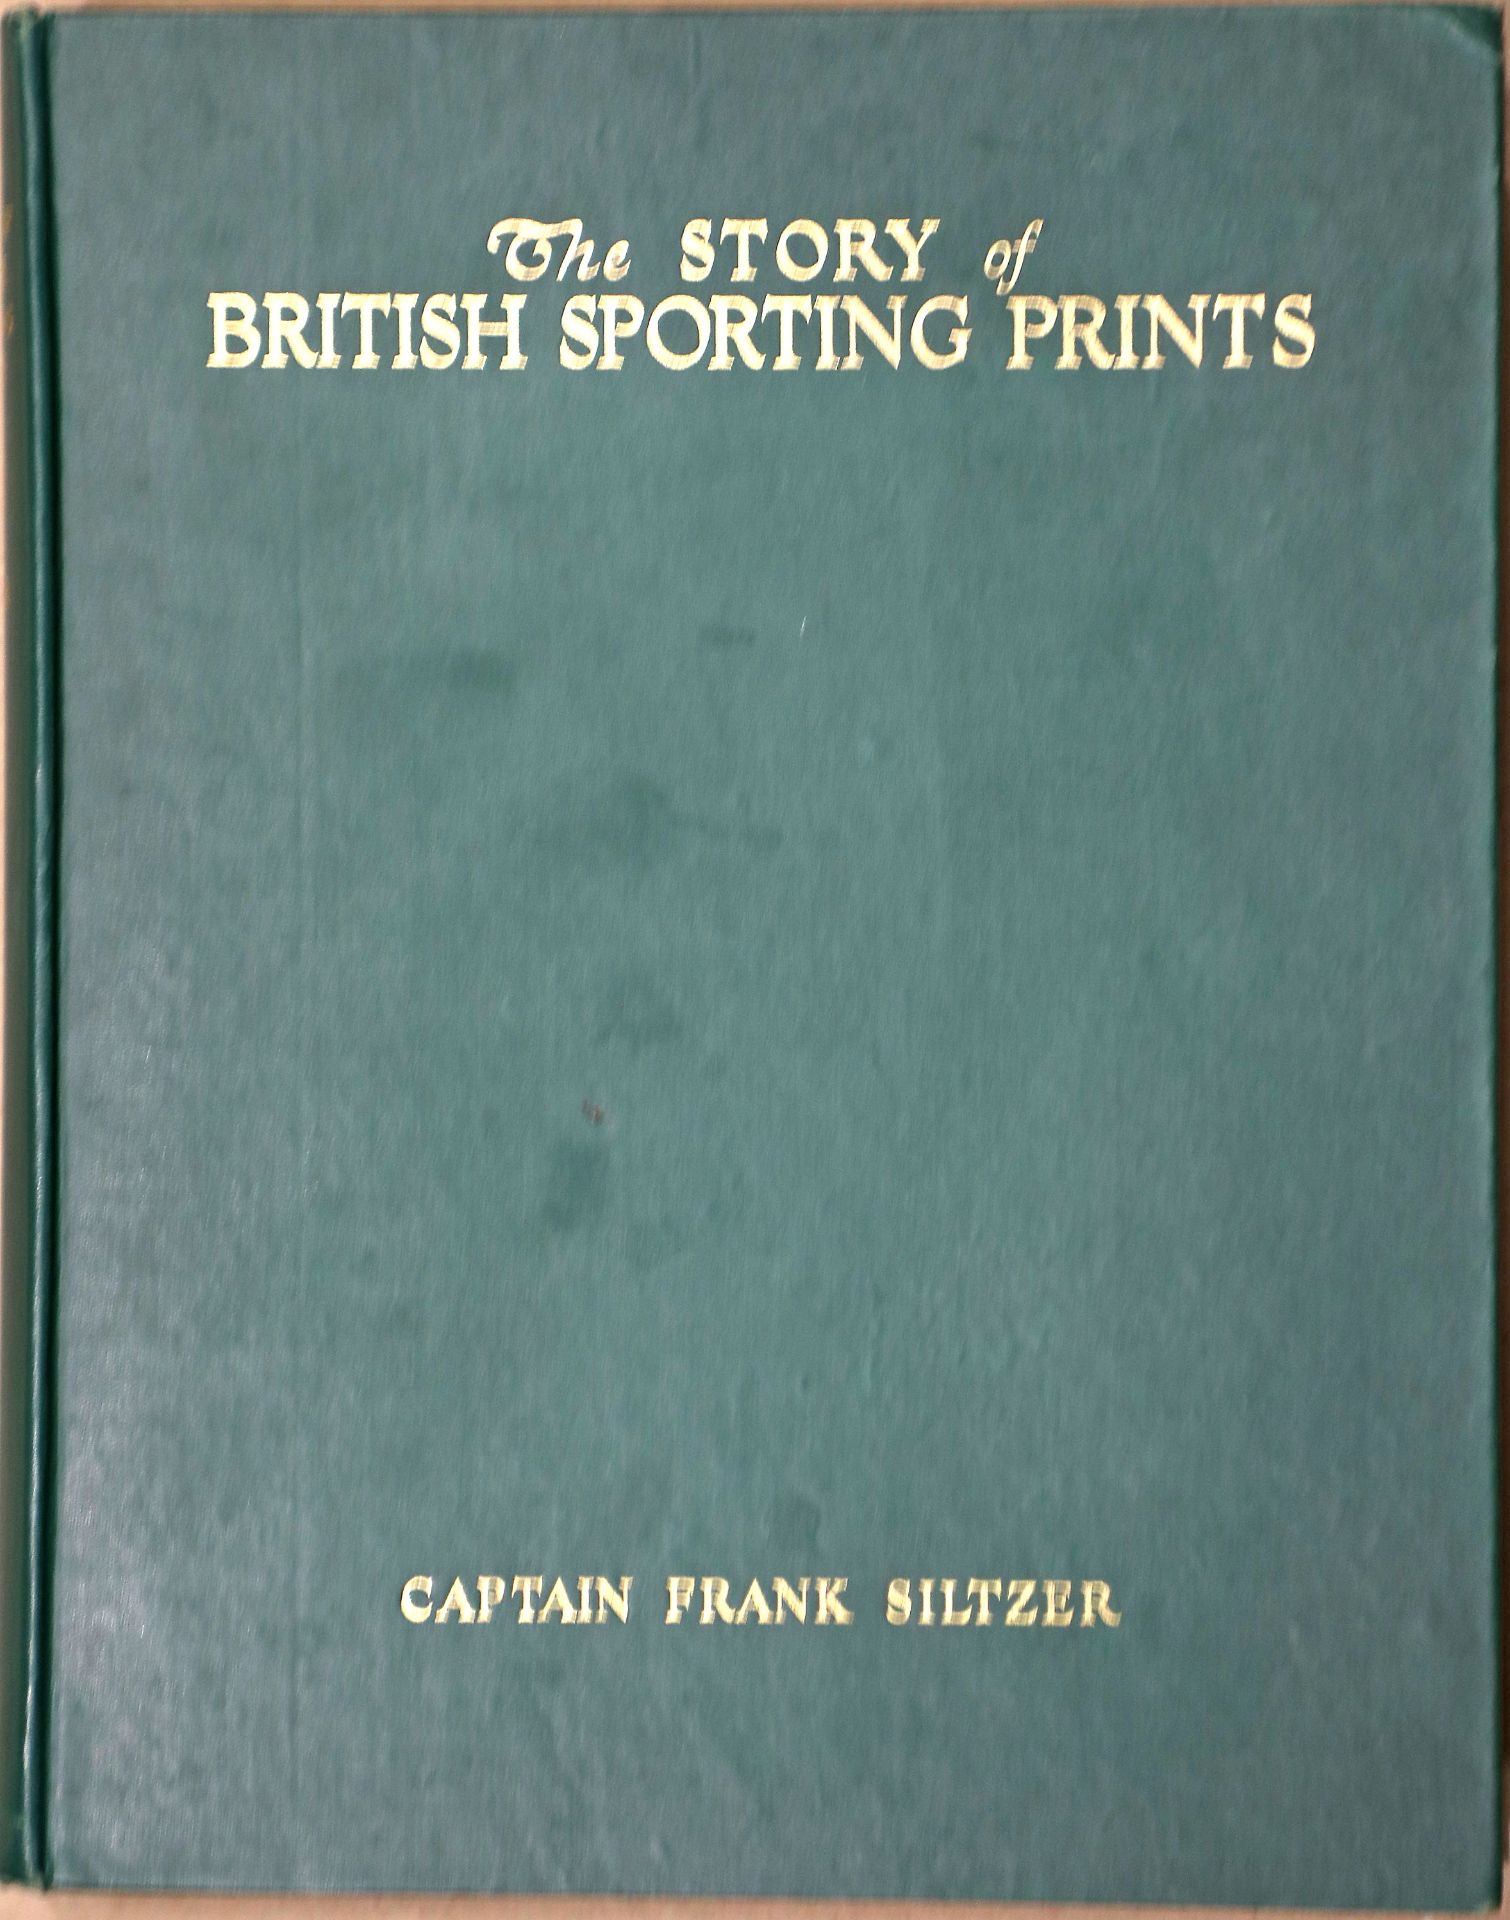 The Story of BRITISH SPORTING PRINTS, Captain Frank Siltzer, New Edition, 4to, cloth, t.e.g. - Image 2 of 14